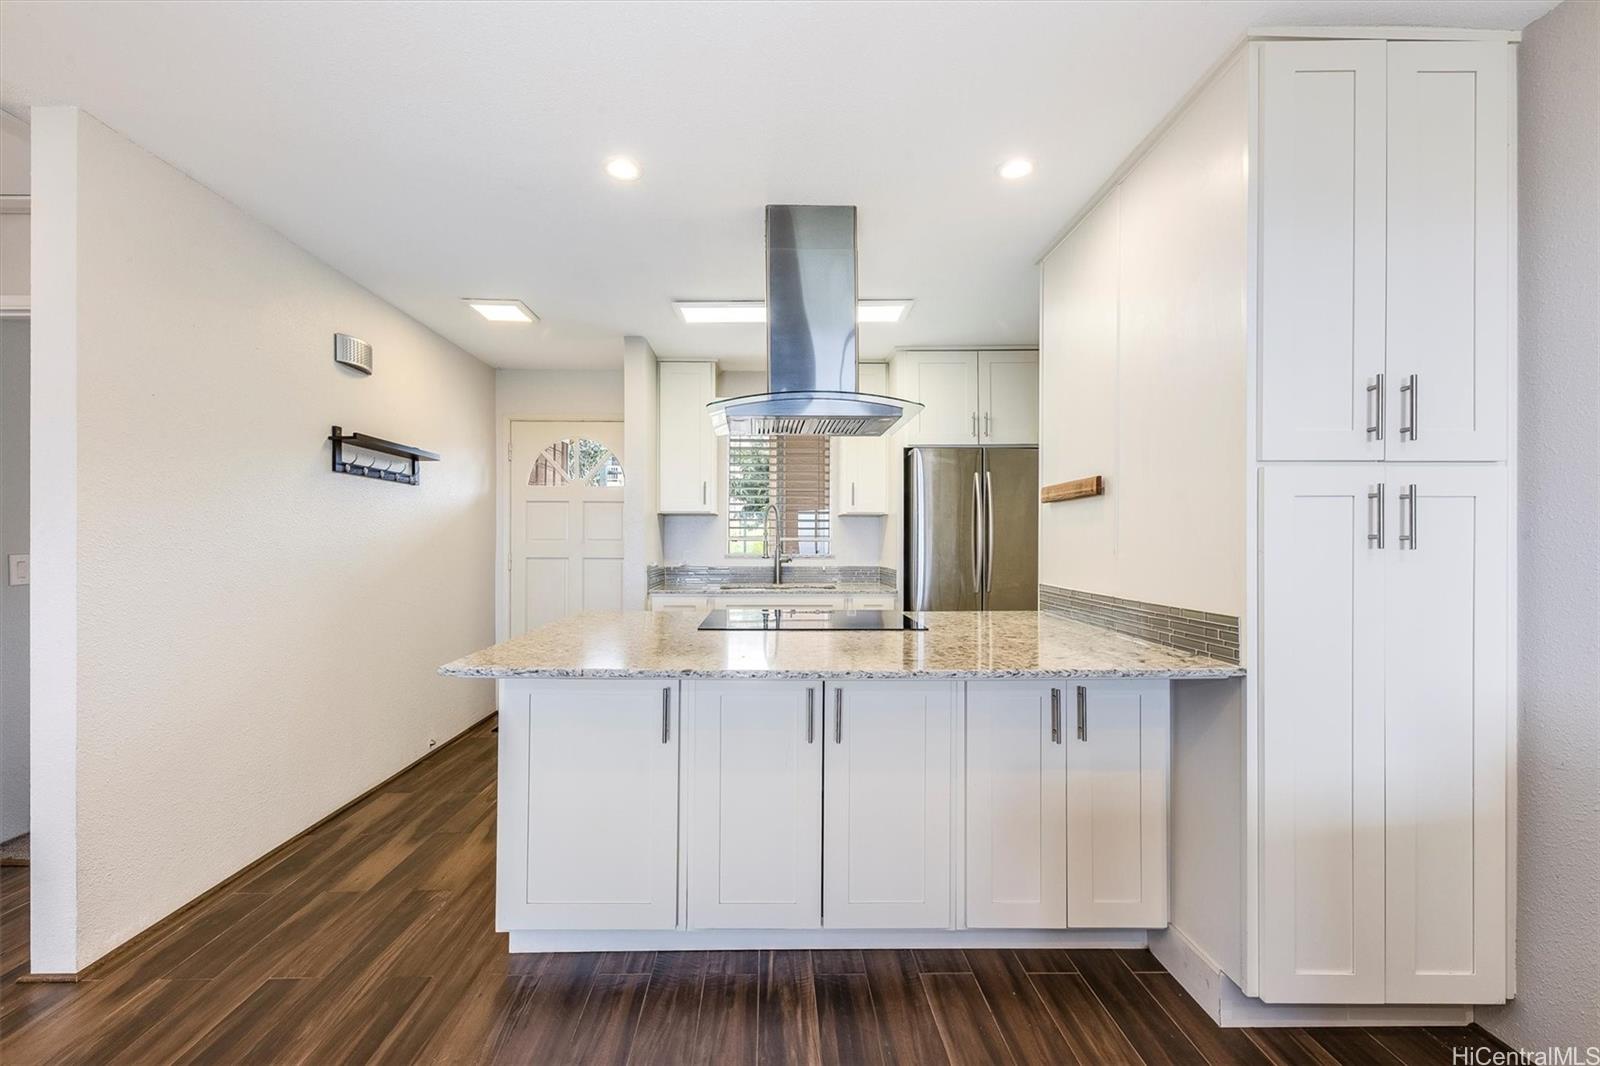 a view of kitchen with granite countertop cabinets and wooden floor